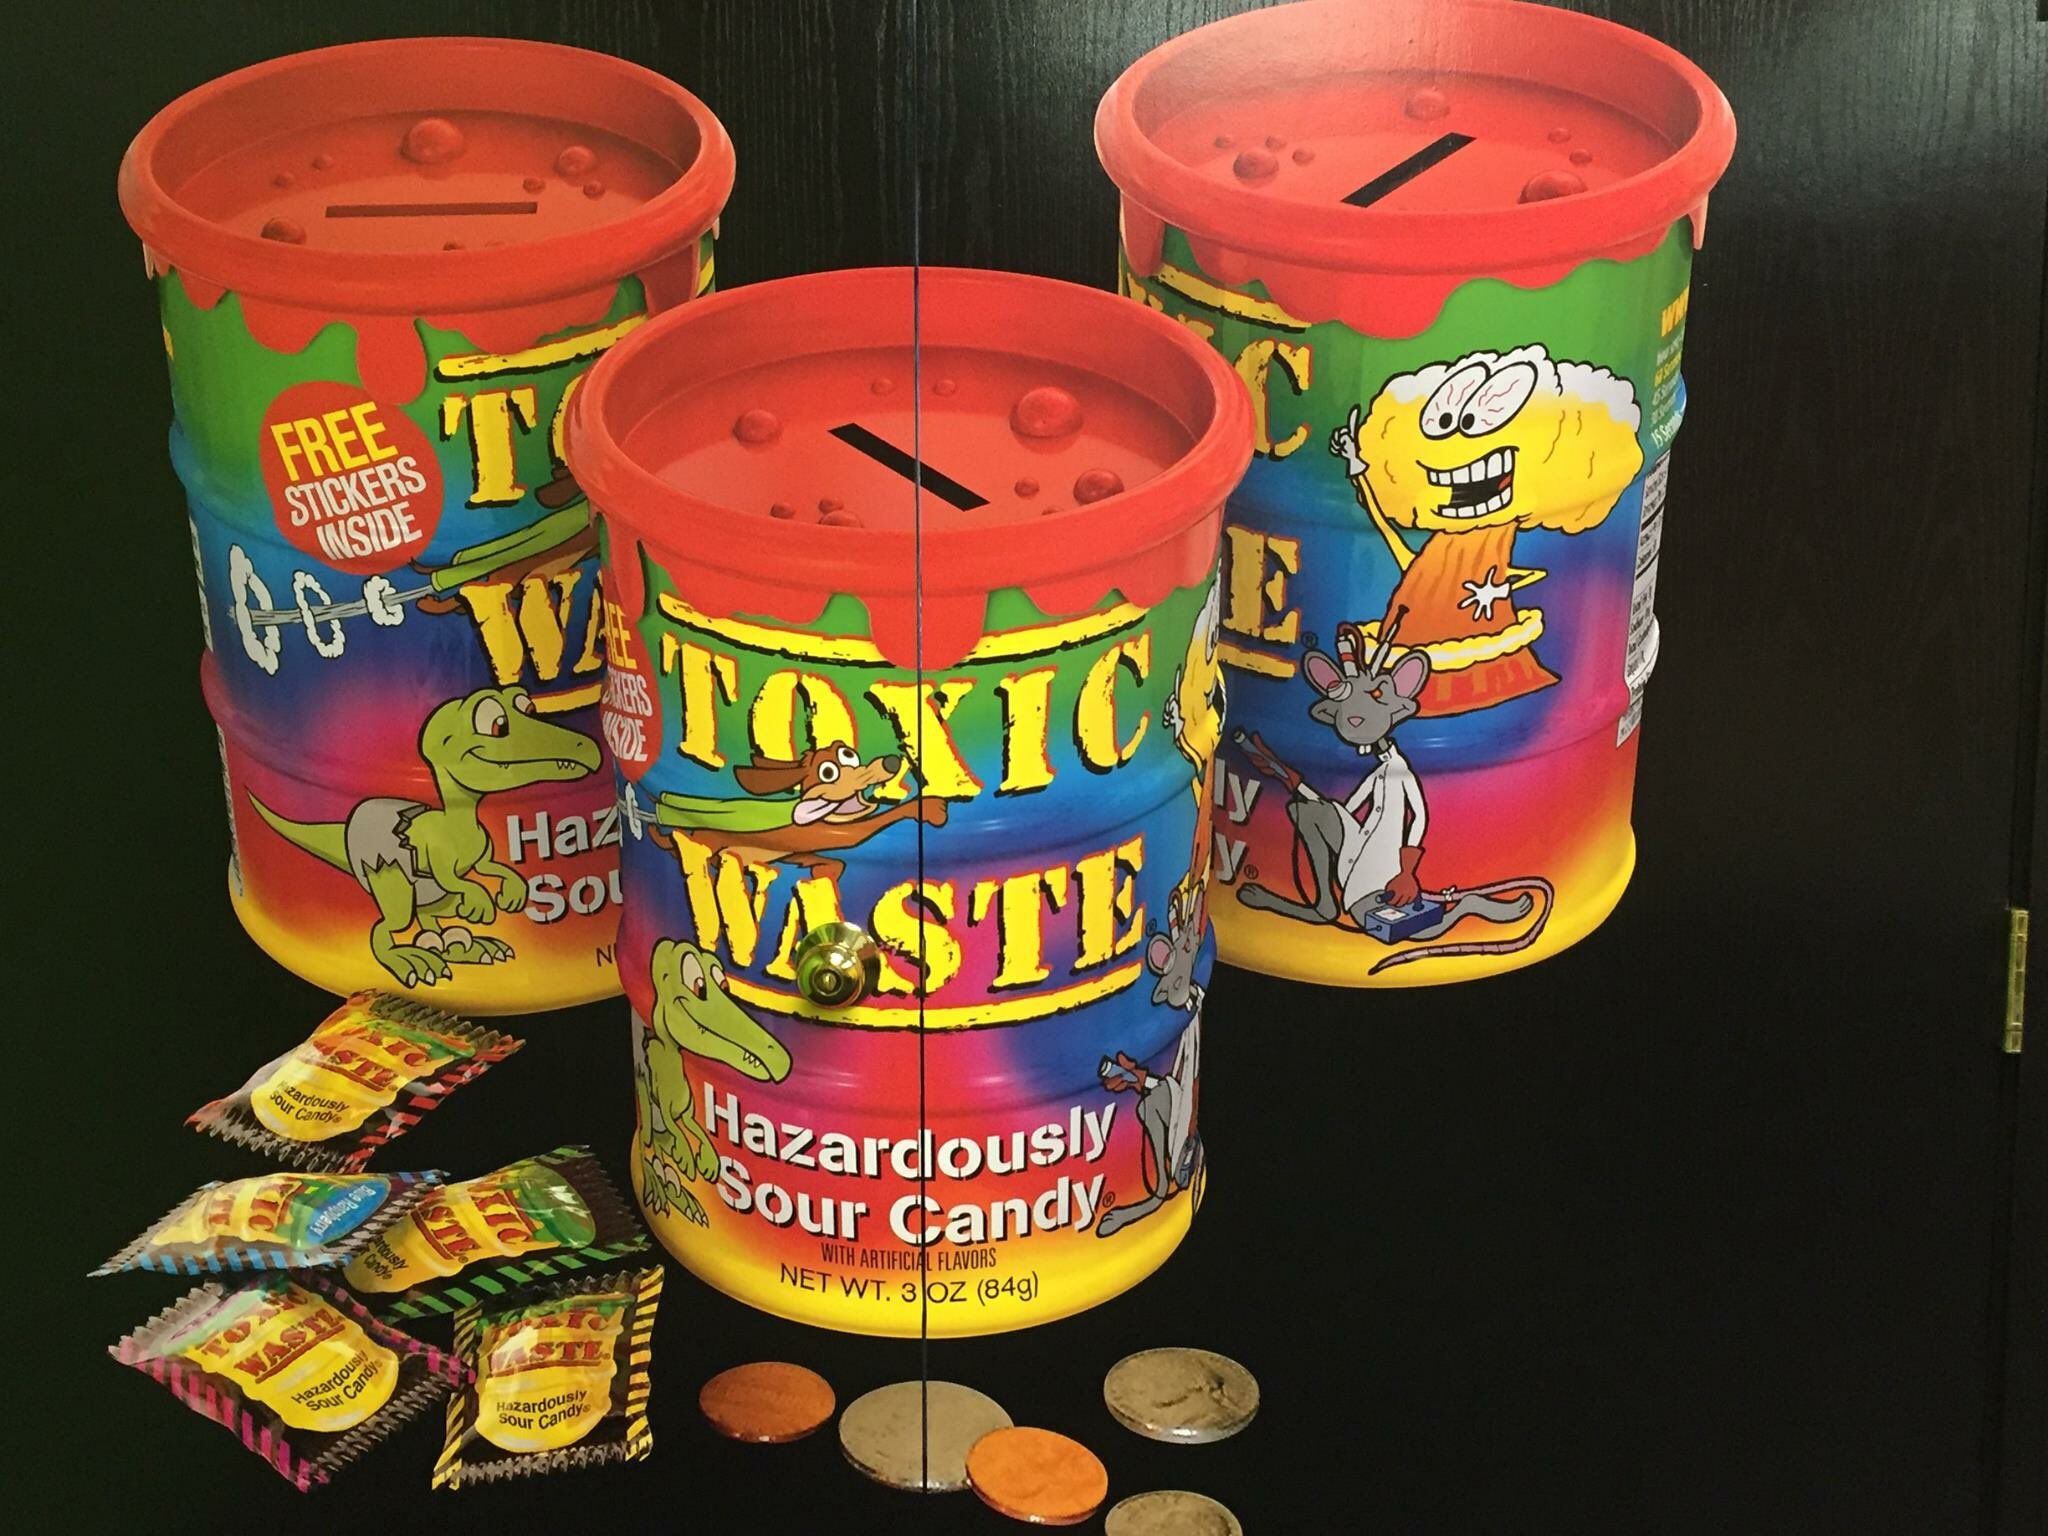 Toxic Waste Candy® some sour to your weekend by adding Toxic Waste Sour Candy to all of your weekend plans! #sourcandy #toxicwastecandy #weekend